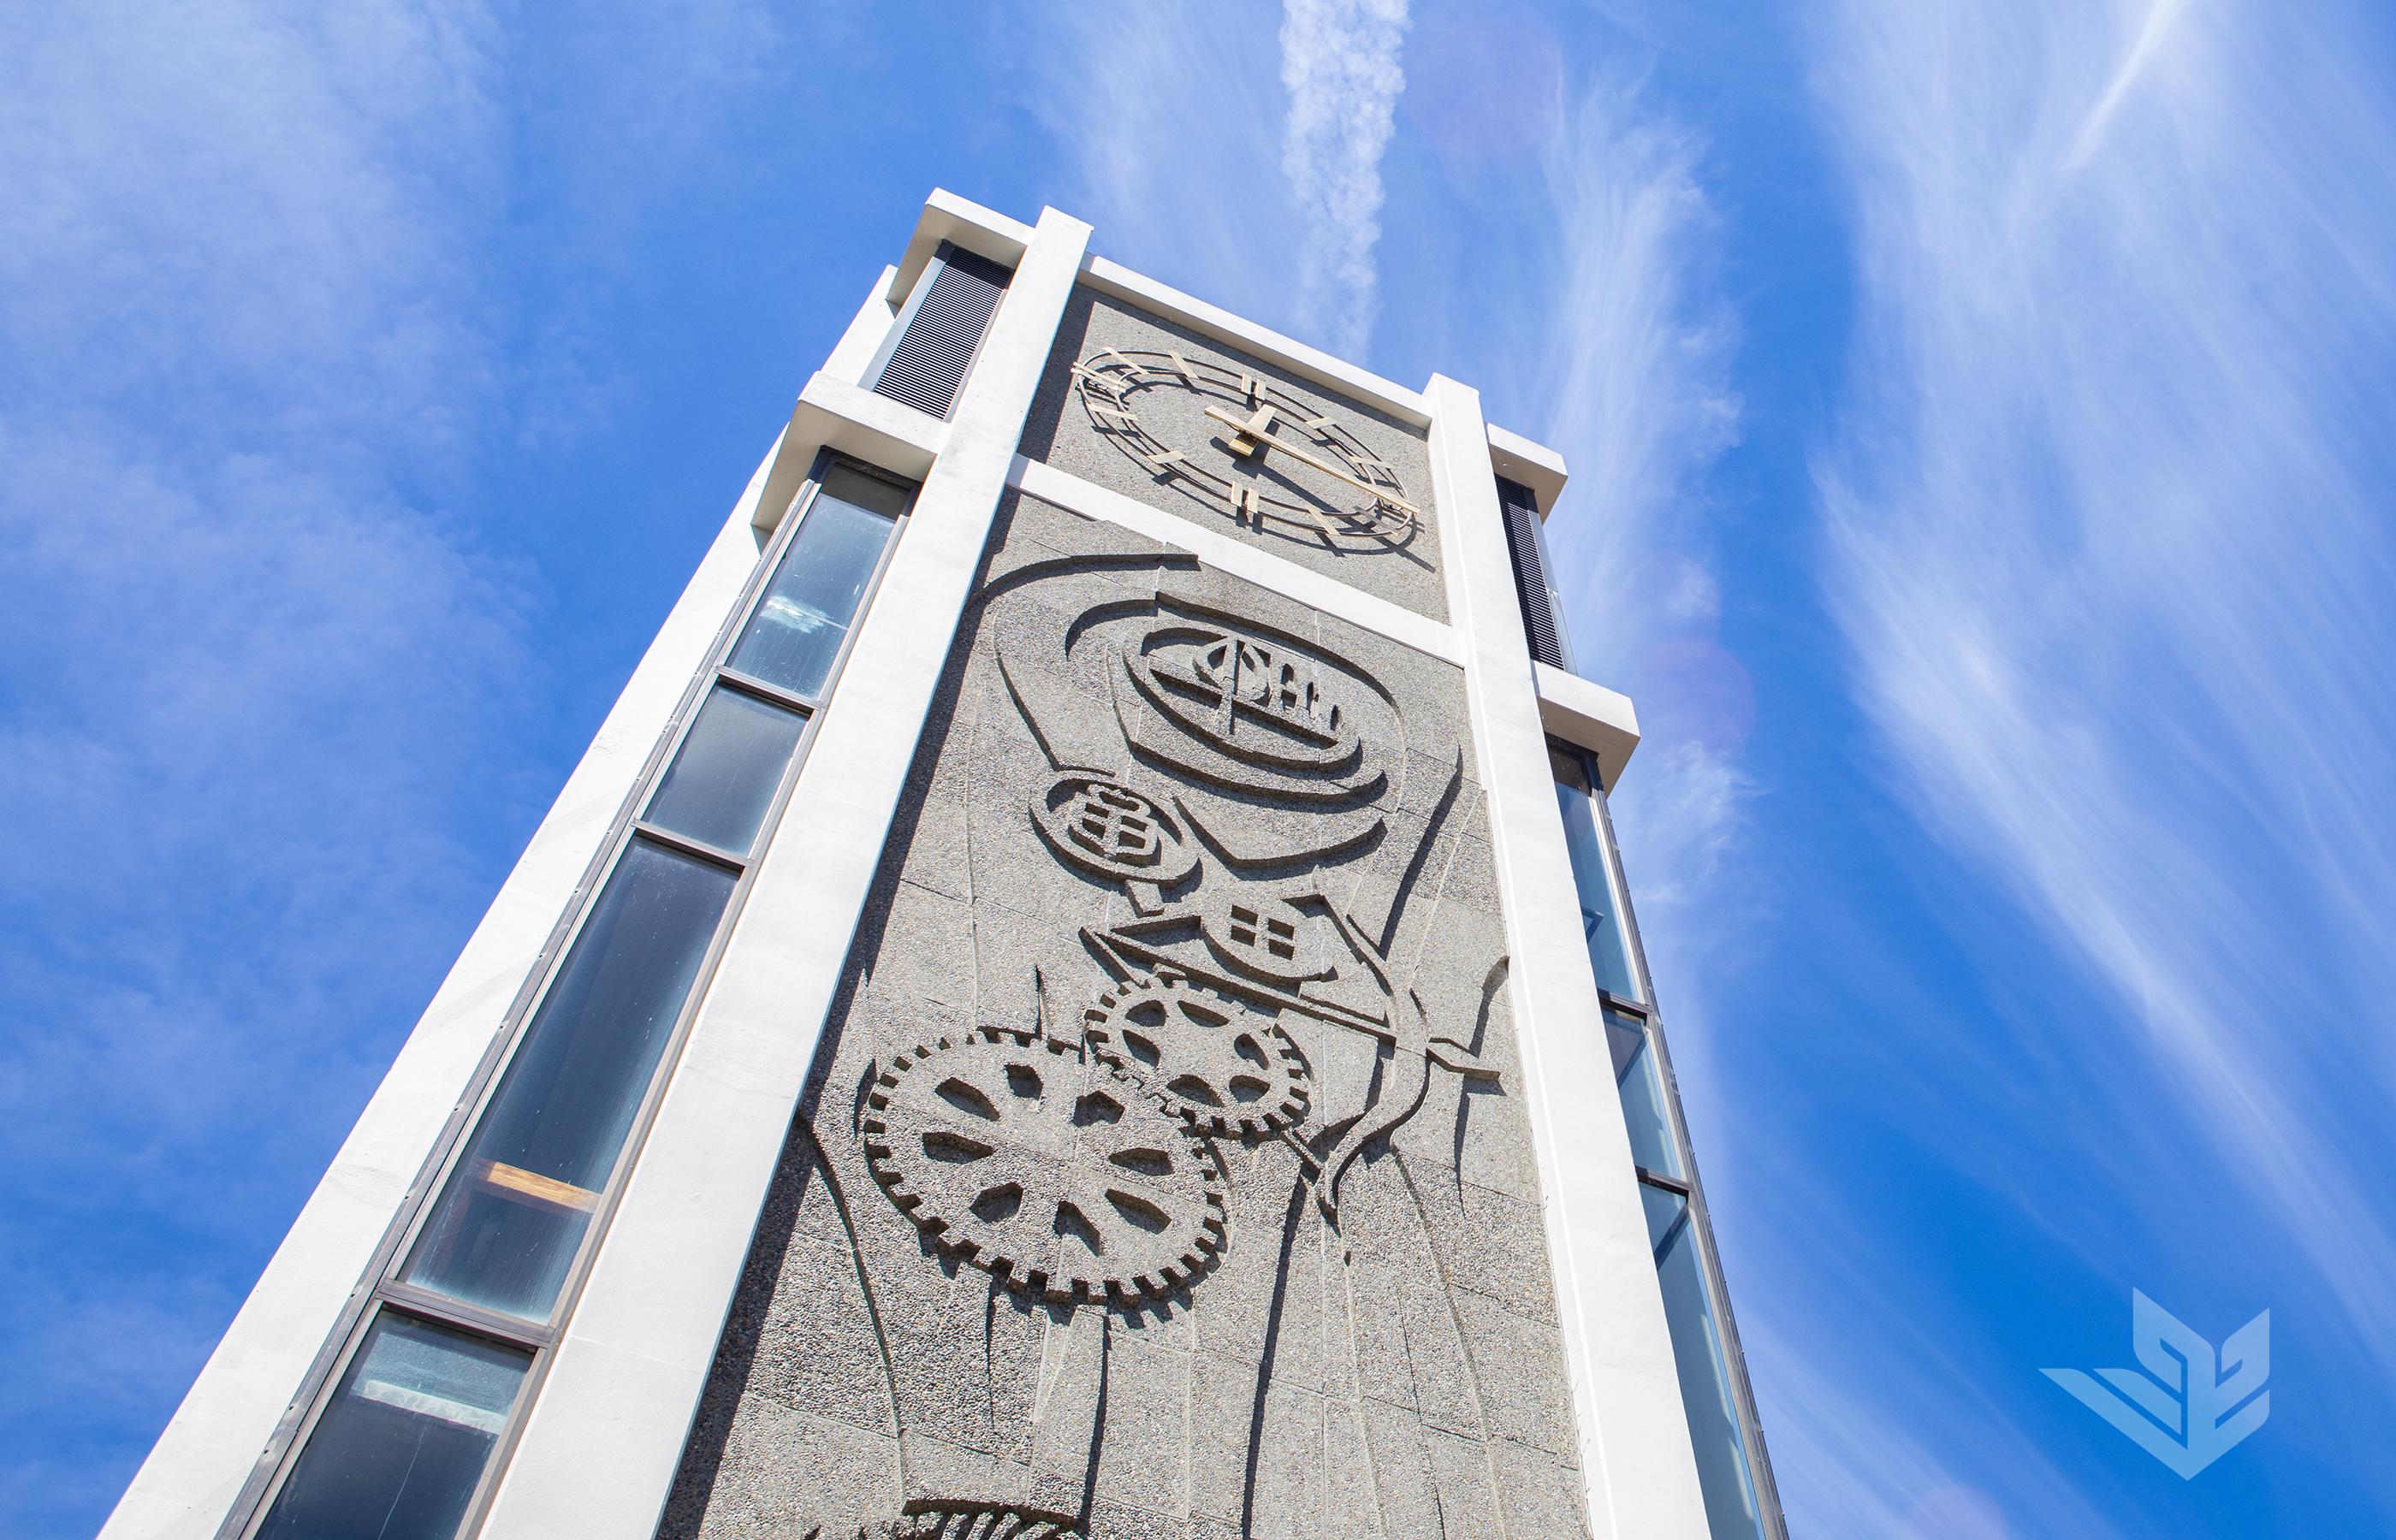 Seattle Pacific University's iconic clock tower against the blue Northwest sky.